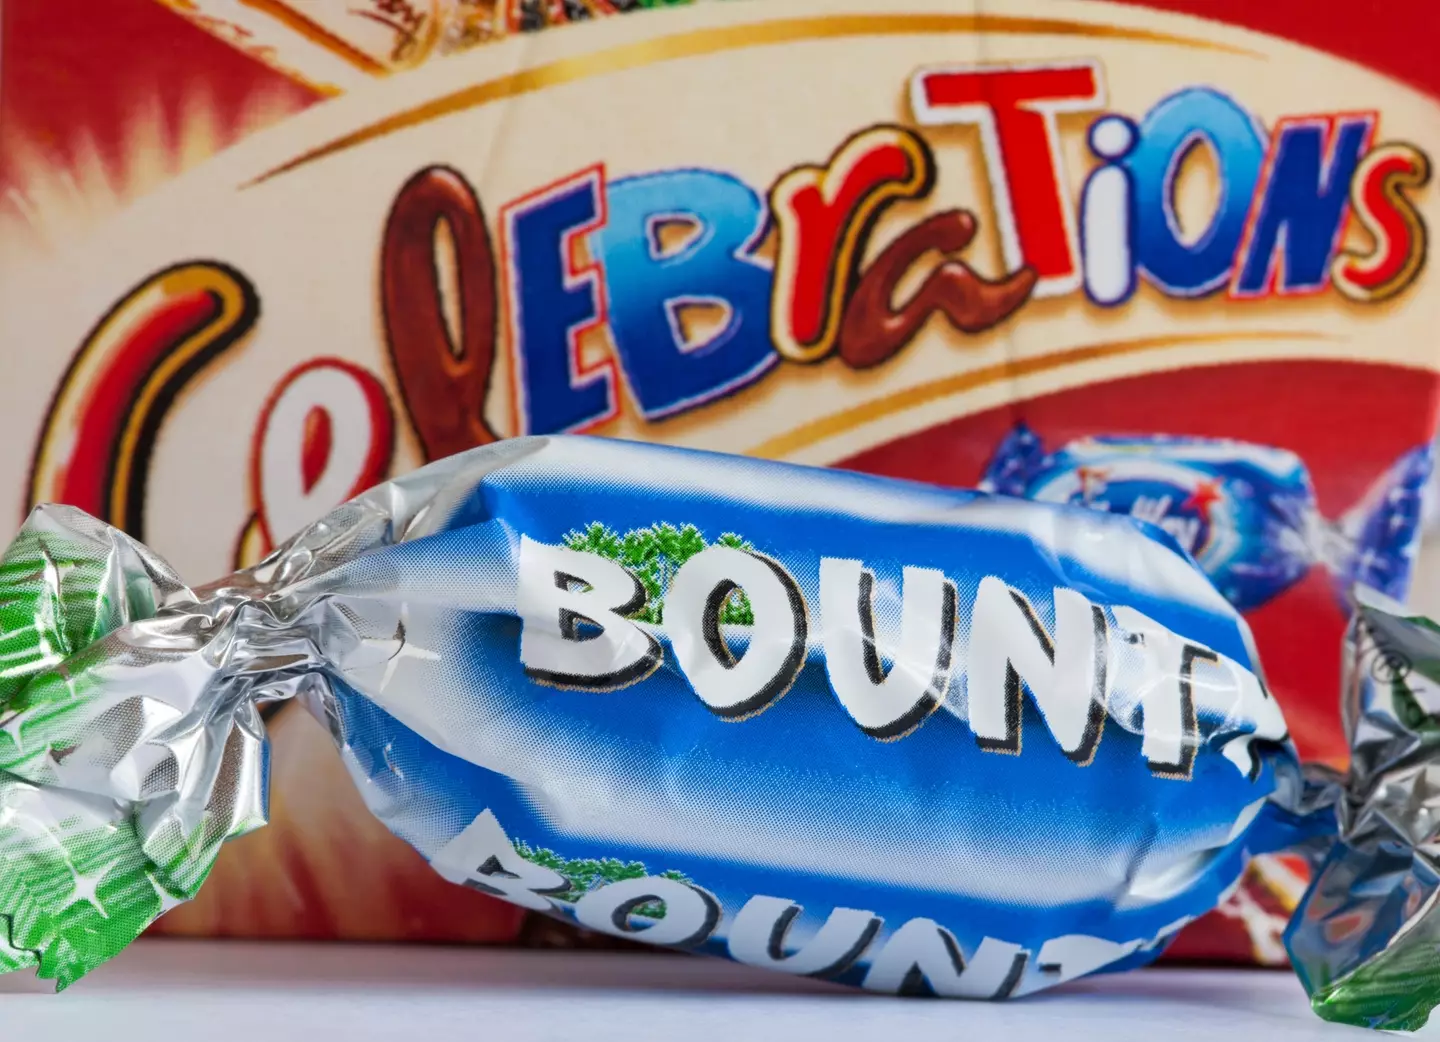 Bounty lovers are outraged by the limited-edition Celebrations tub.